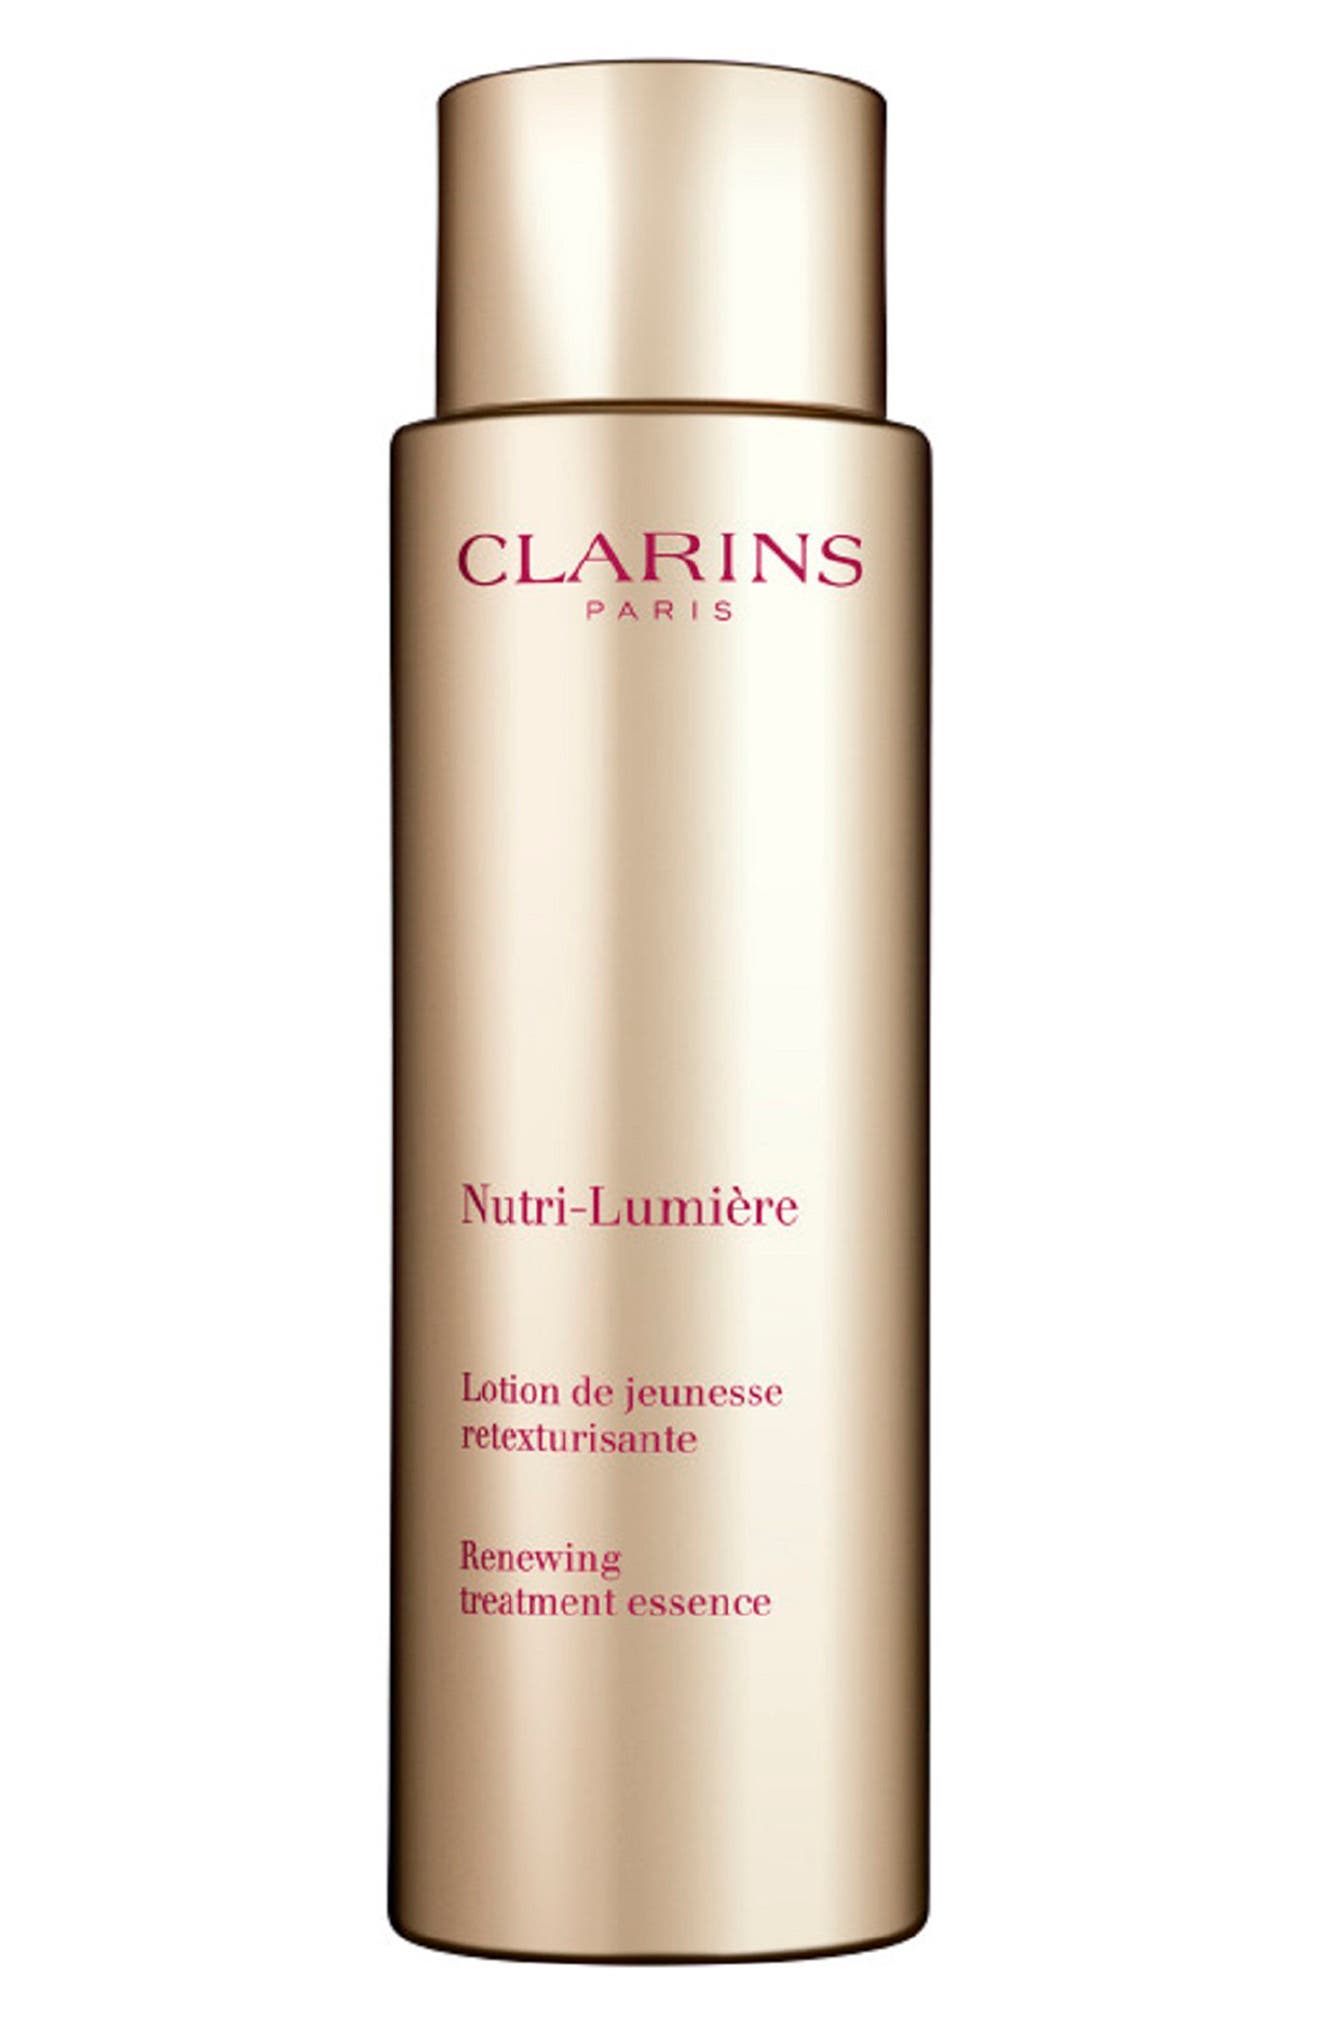 Clarins Nutri-Lumiere Renewing Treatment Essence at Nordstrom